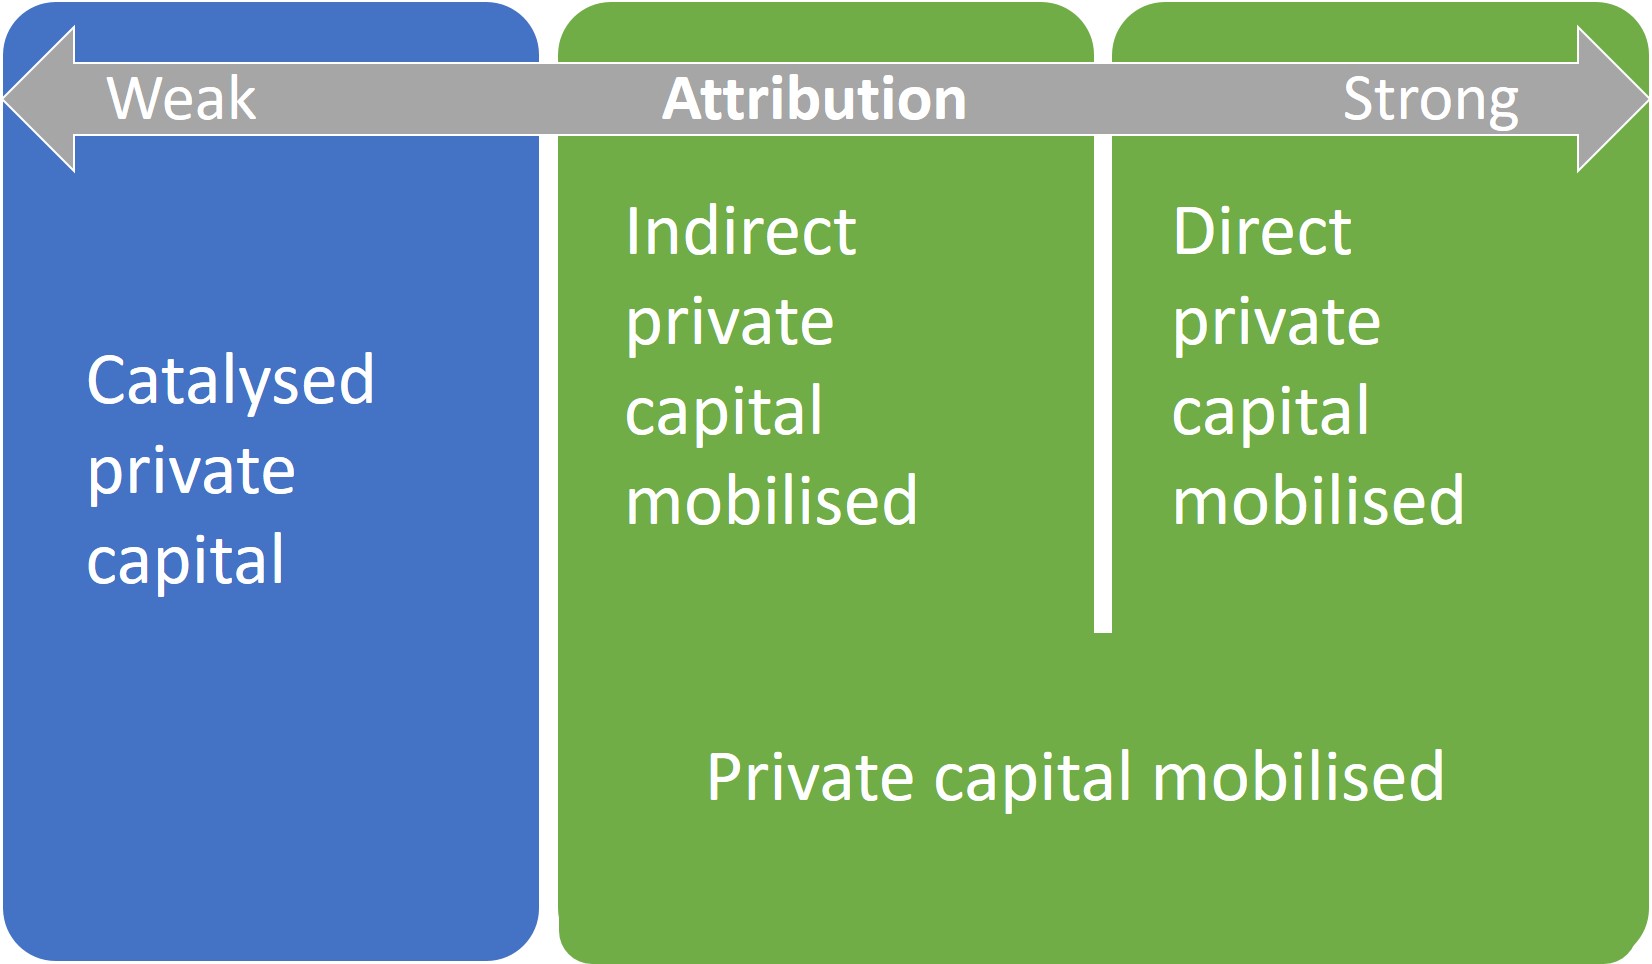 Schematic showing attribution getting progressively stronger through catalysed capital, to indirect mobilised capital, to direct mobilised capital. 